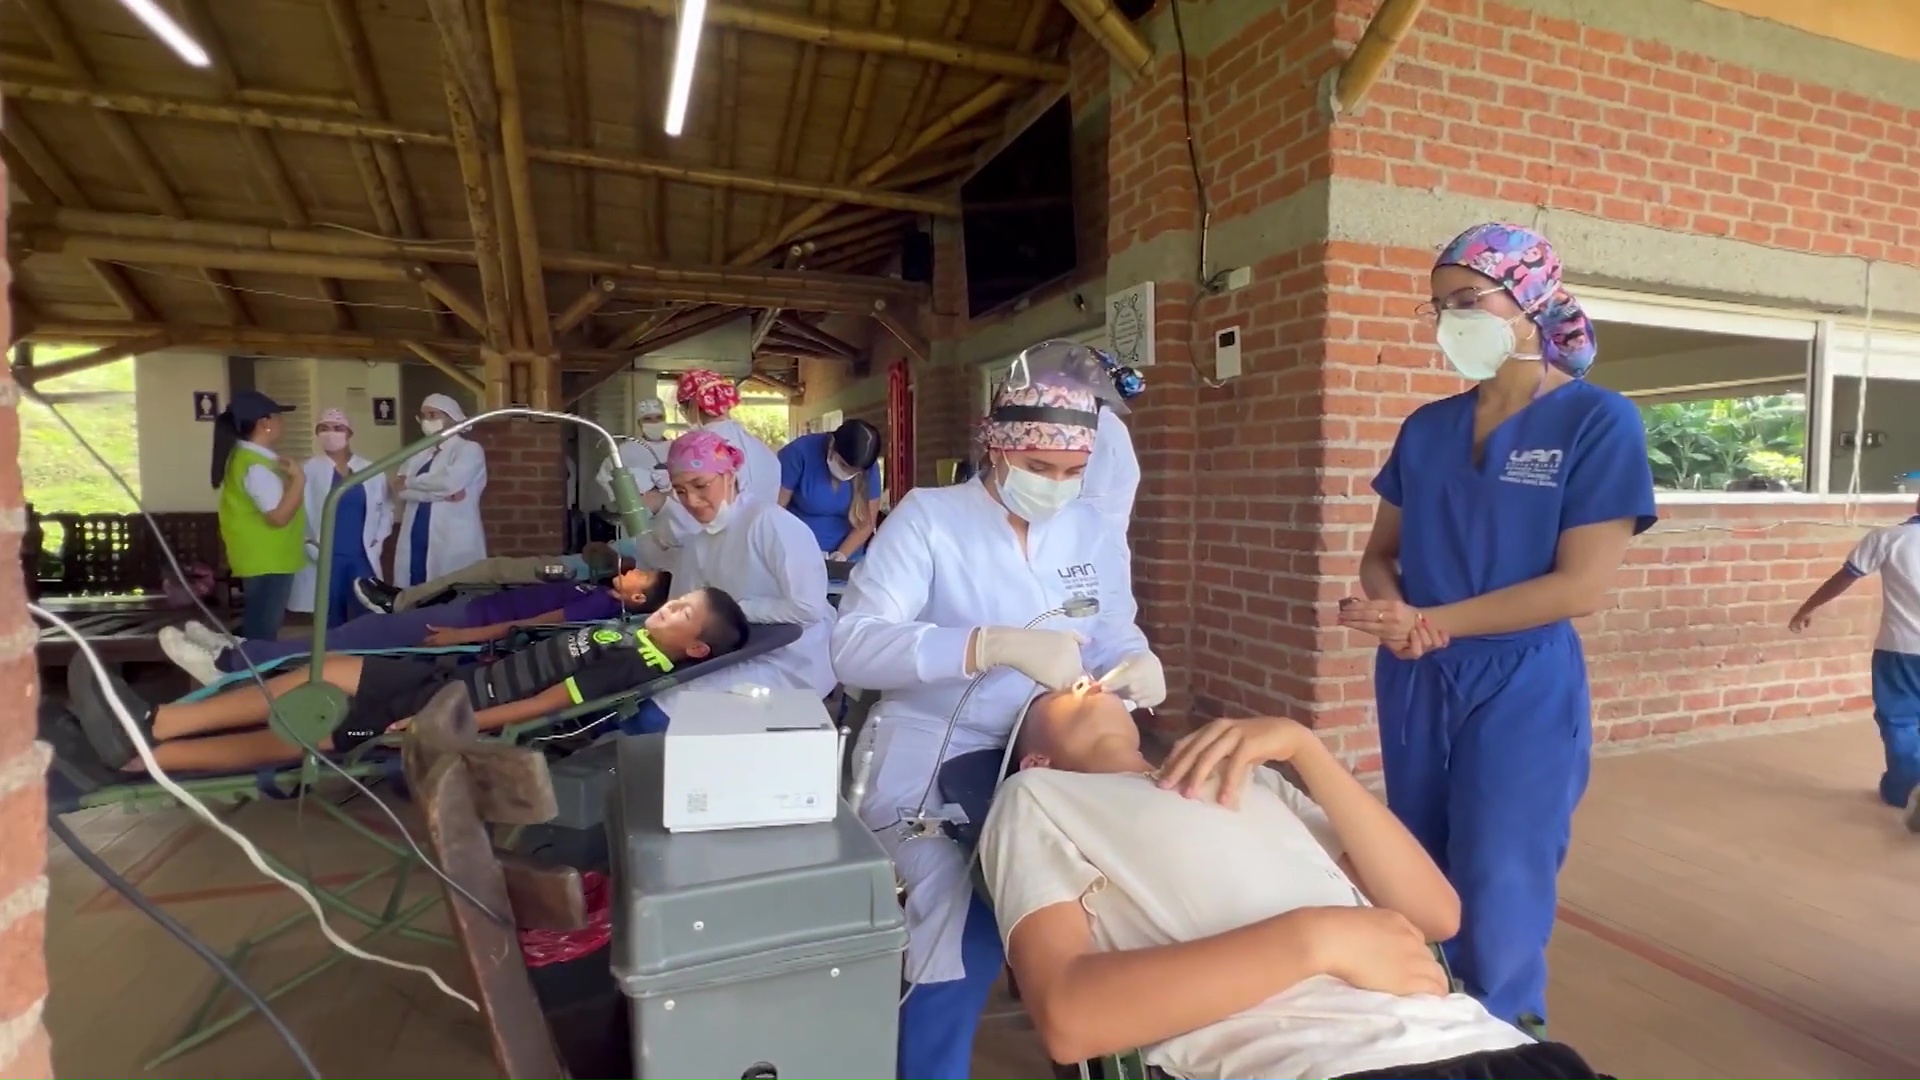 In Colombia, the Foundation Misericordia, in collaboration with the University Antonio Nariño, carried out a dental brigade.